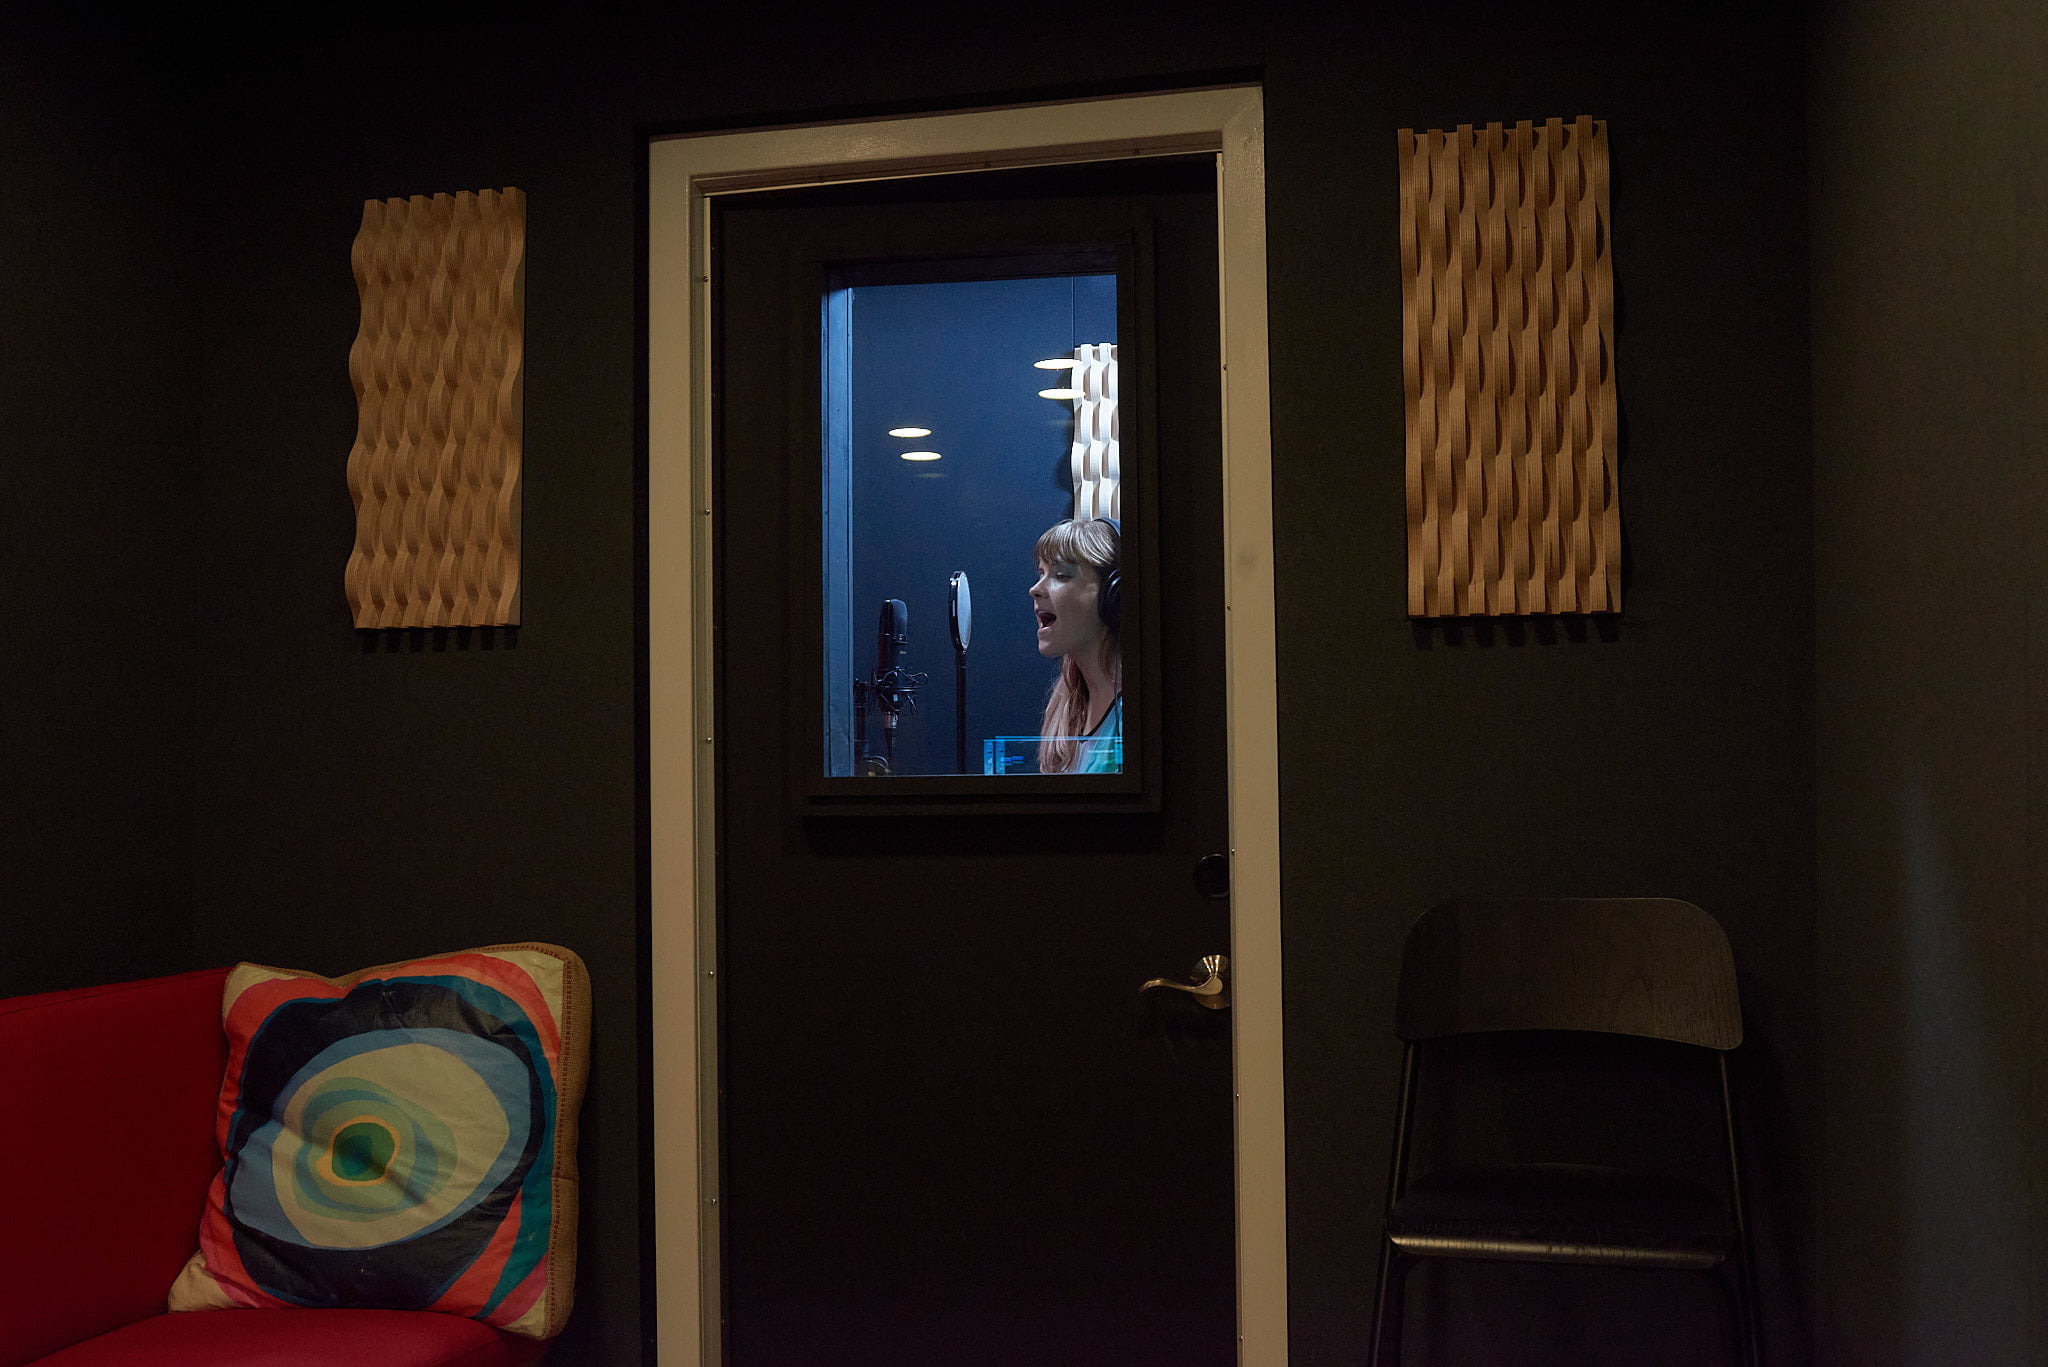 A vocal recording artist singing into a microphone in the booth of a mobile sound studio trailer.